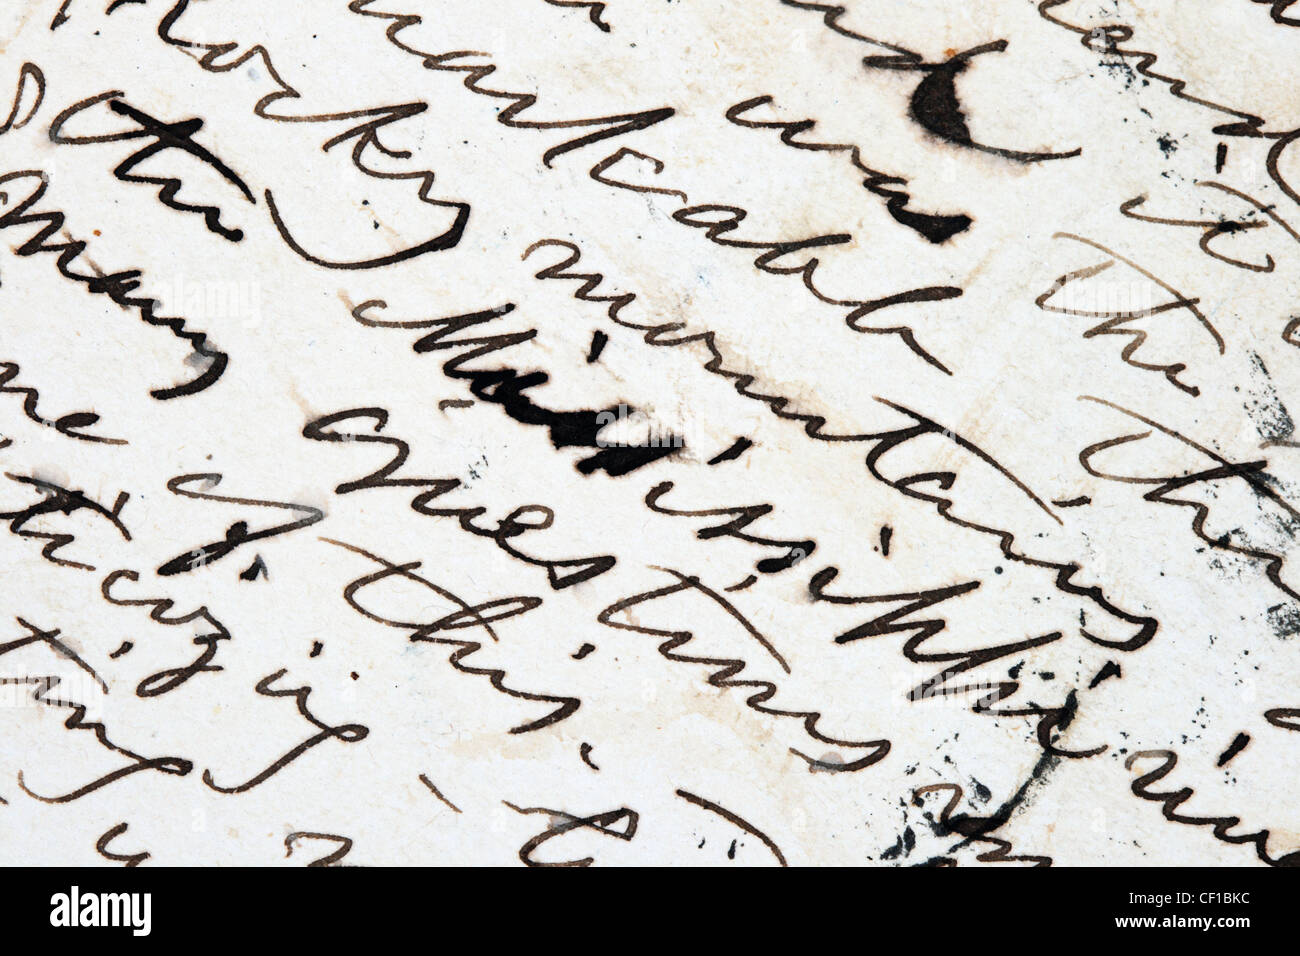 detail from an old pen and ink letter with cursive writing Stock Photo